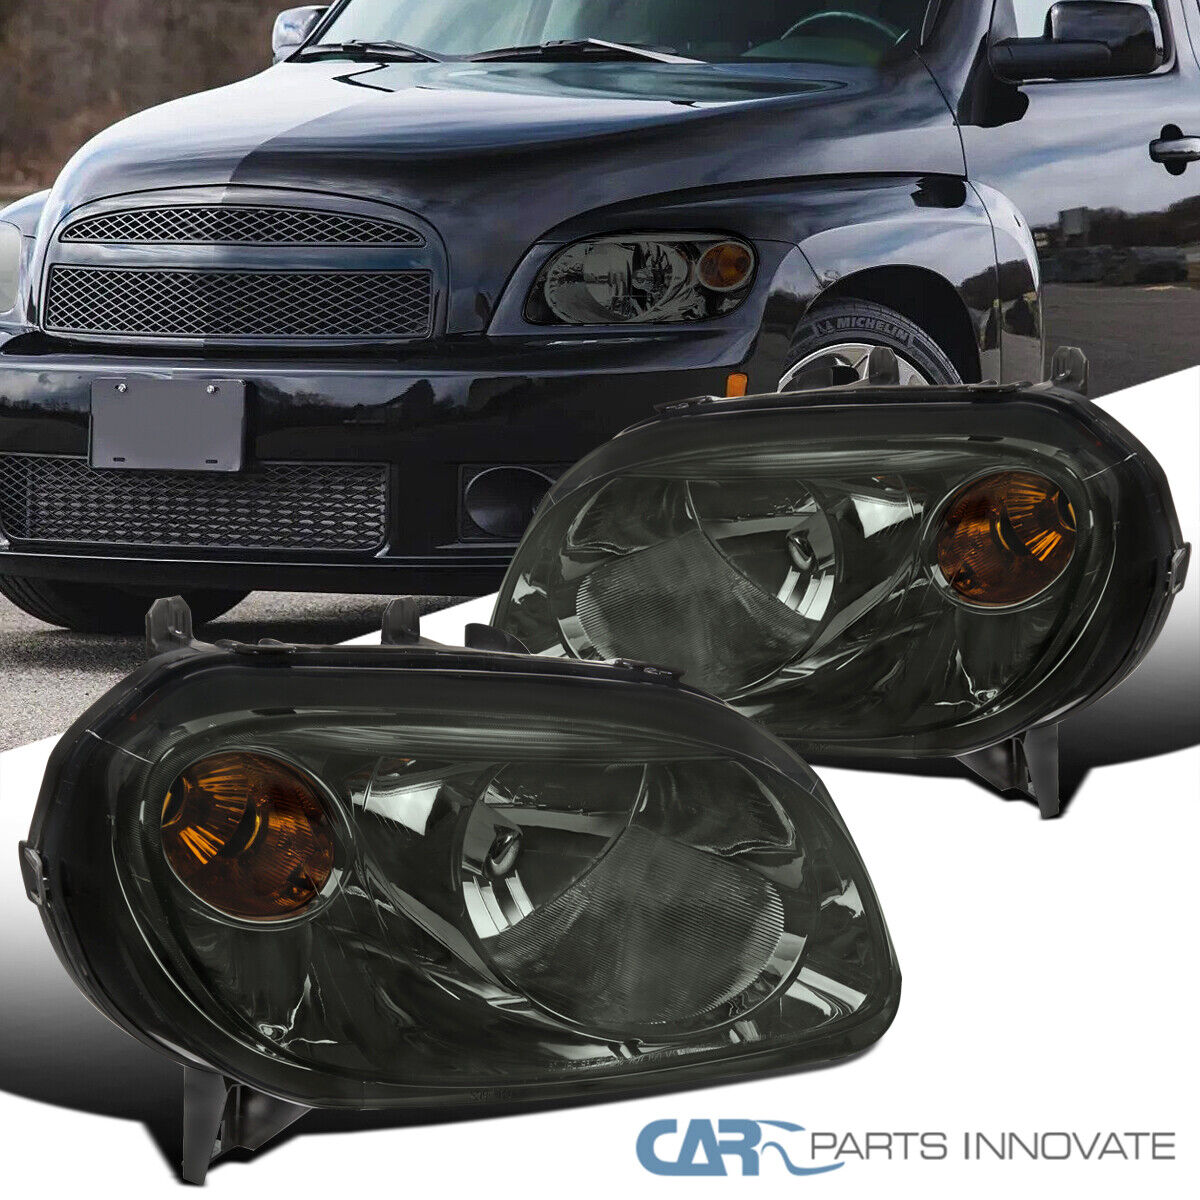 Fits 2006-2011 Chevrolet HHR Smoke Headlights Lamps Left+Right Assembly Pair